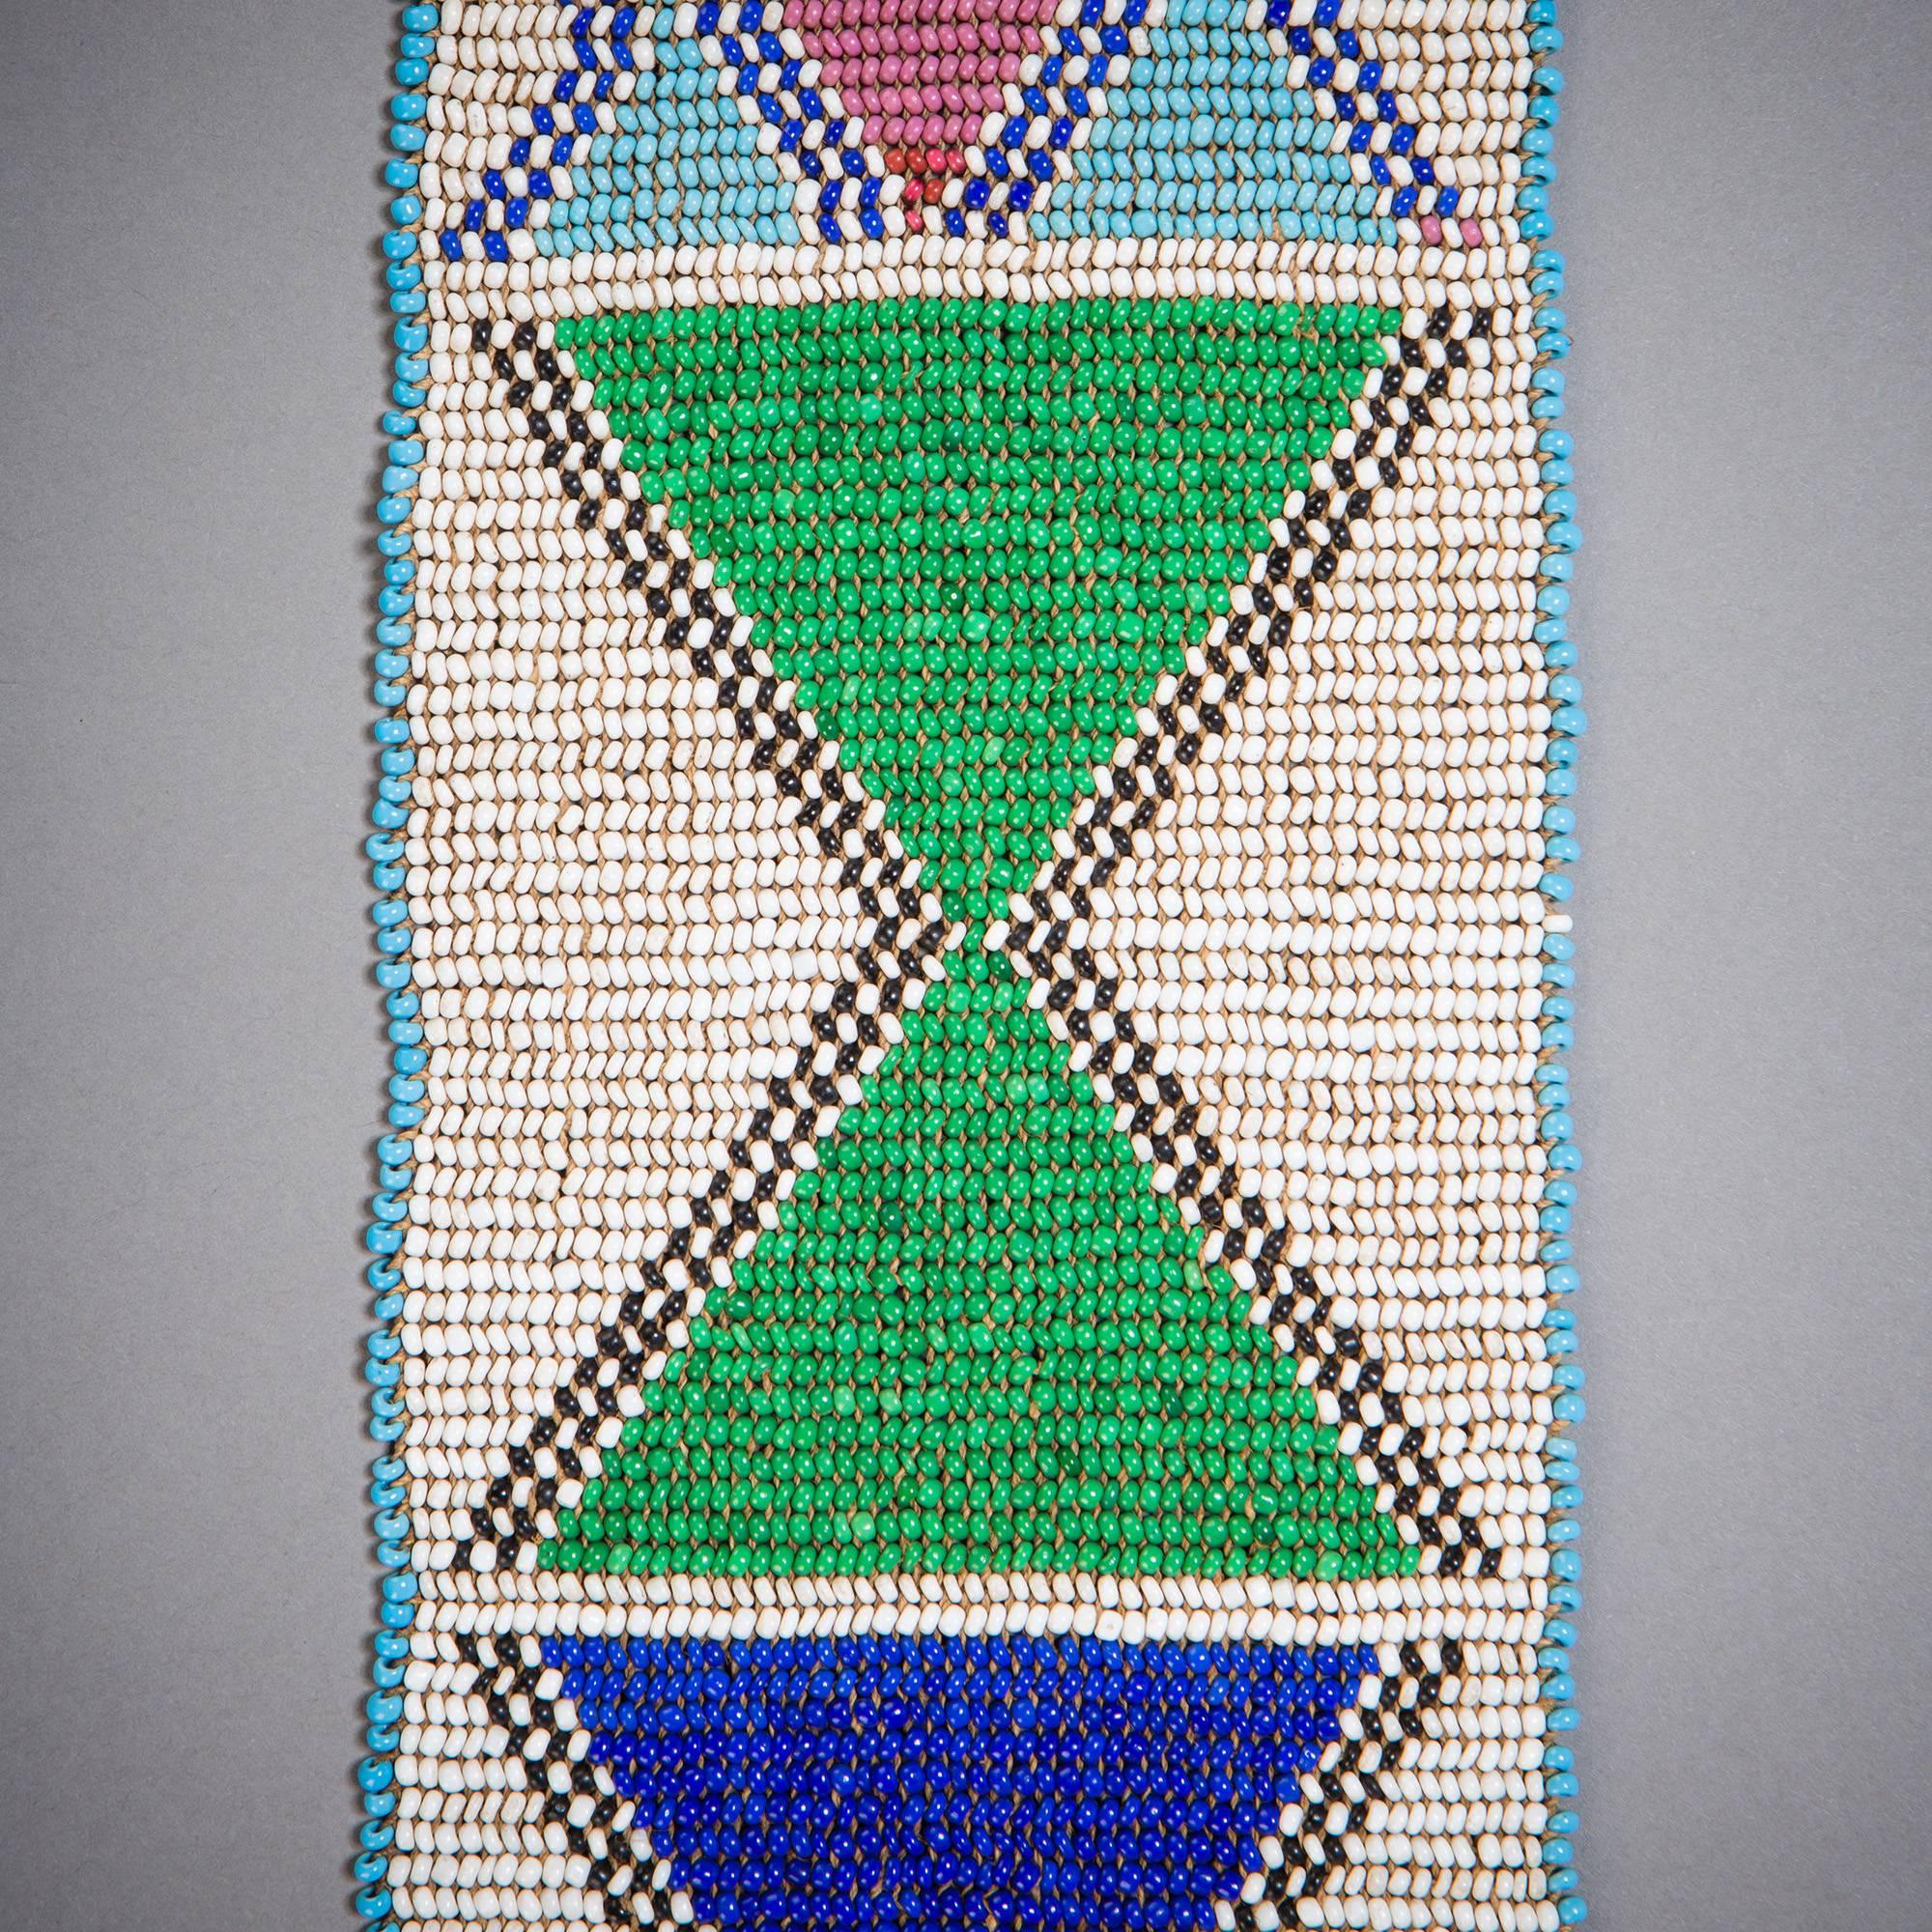 Malawian Late 19th or Early 20th Century Tribal Yao Beaded Sash, Malawi or Mozambique